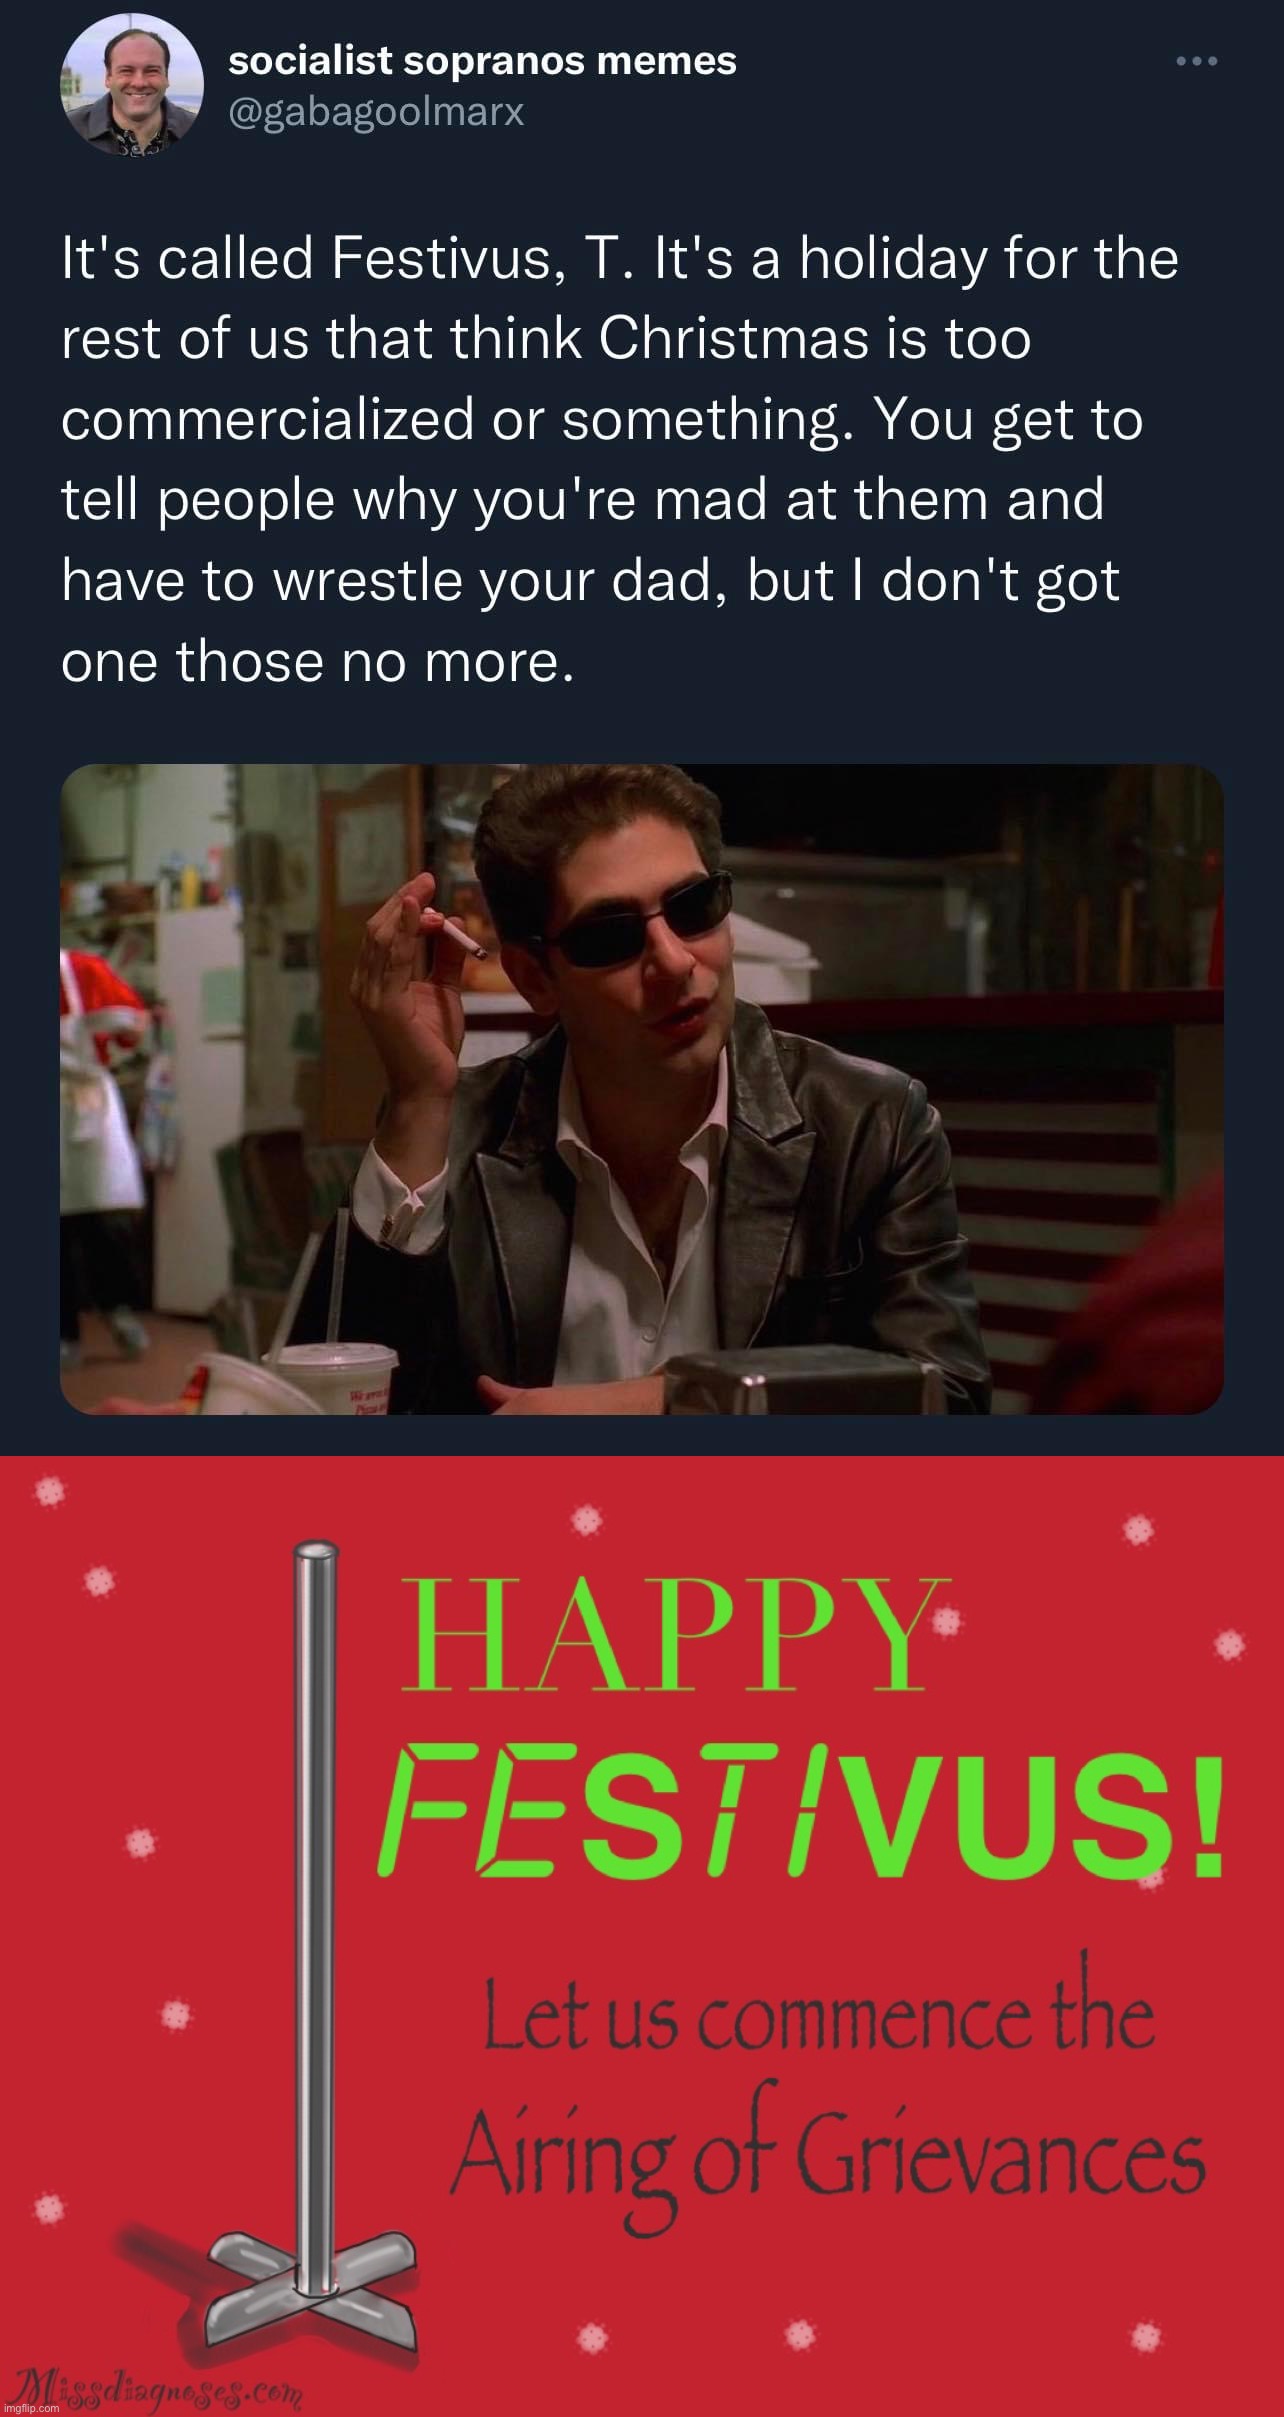 By Vice-Presidential decree, this meme is declared a Safe Space for the airing of grievances on a special day such as this. | image tagged in festivus airing of grievances,festivus,airing,of,grievances,safe space | made w/ Imgflip meme maker